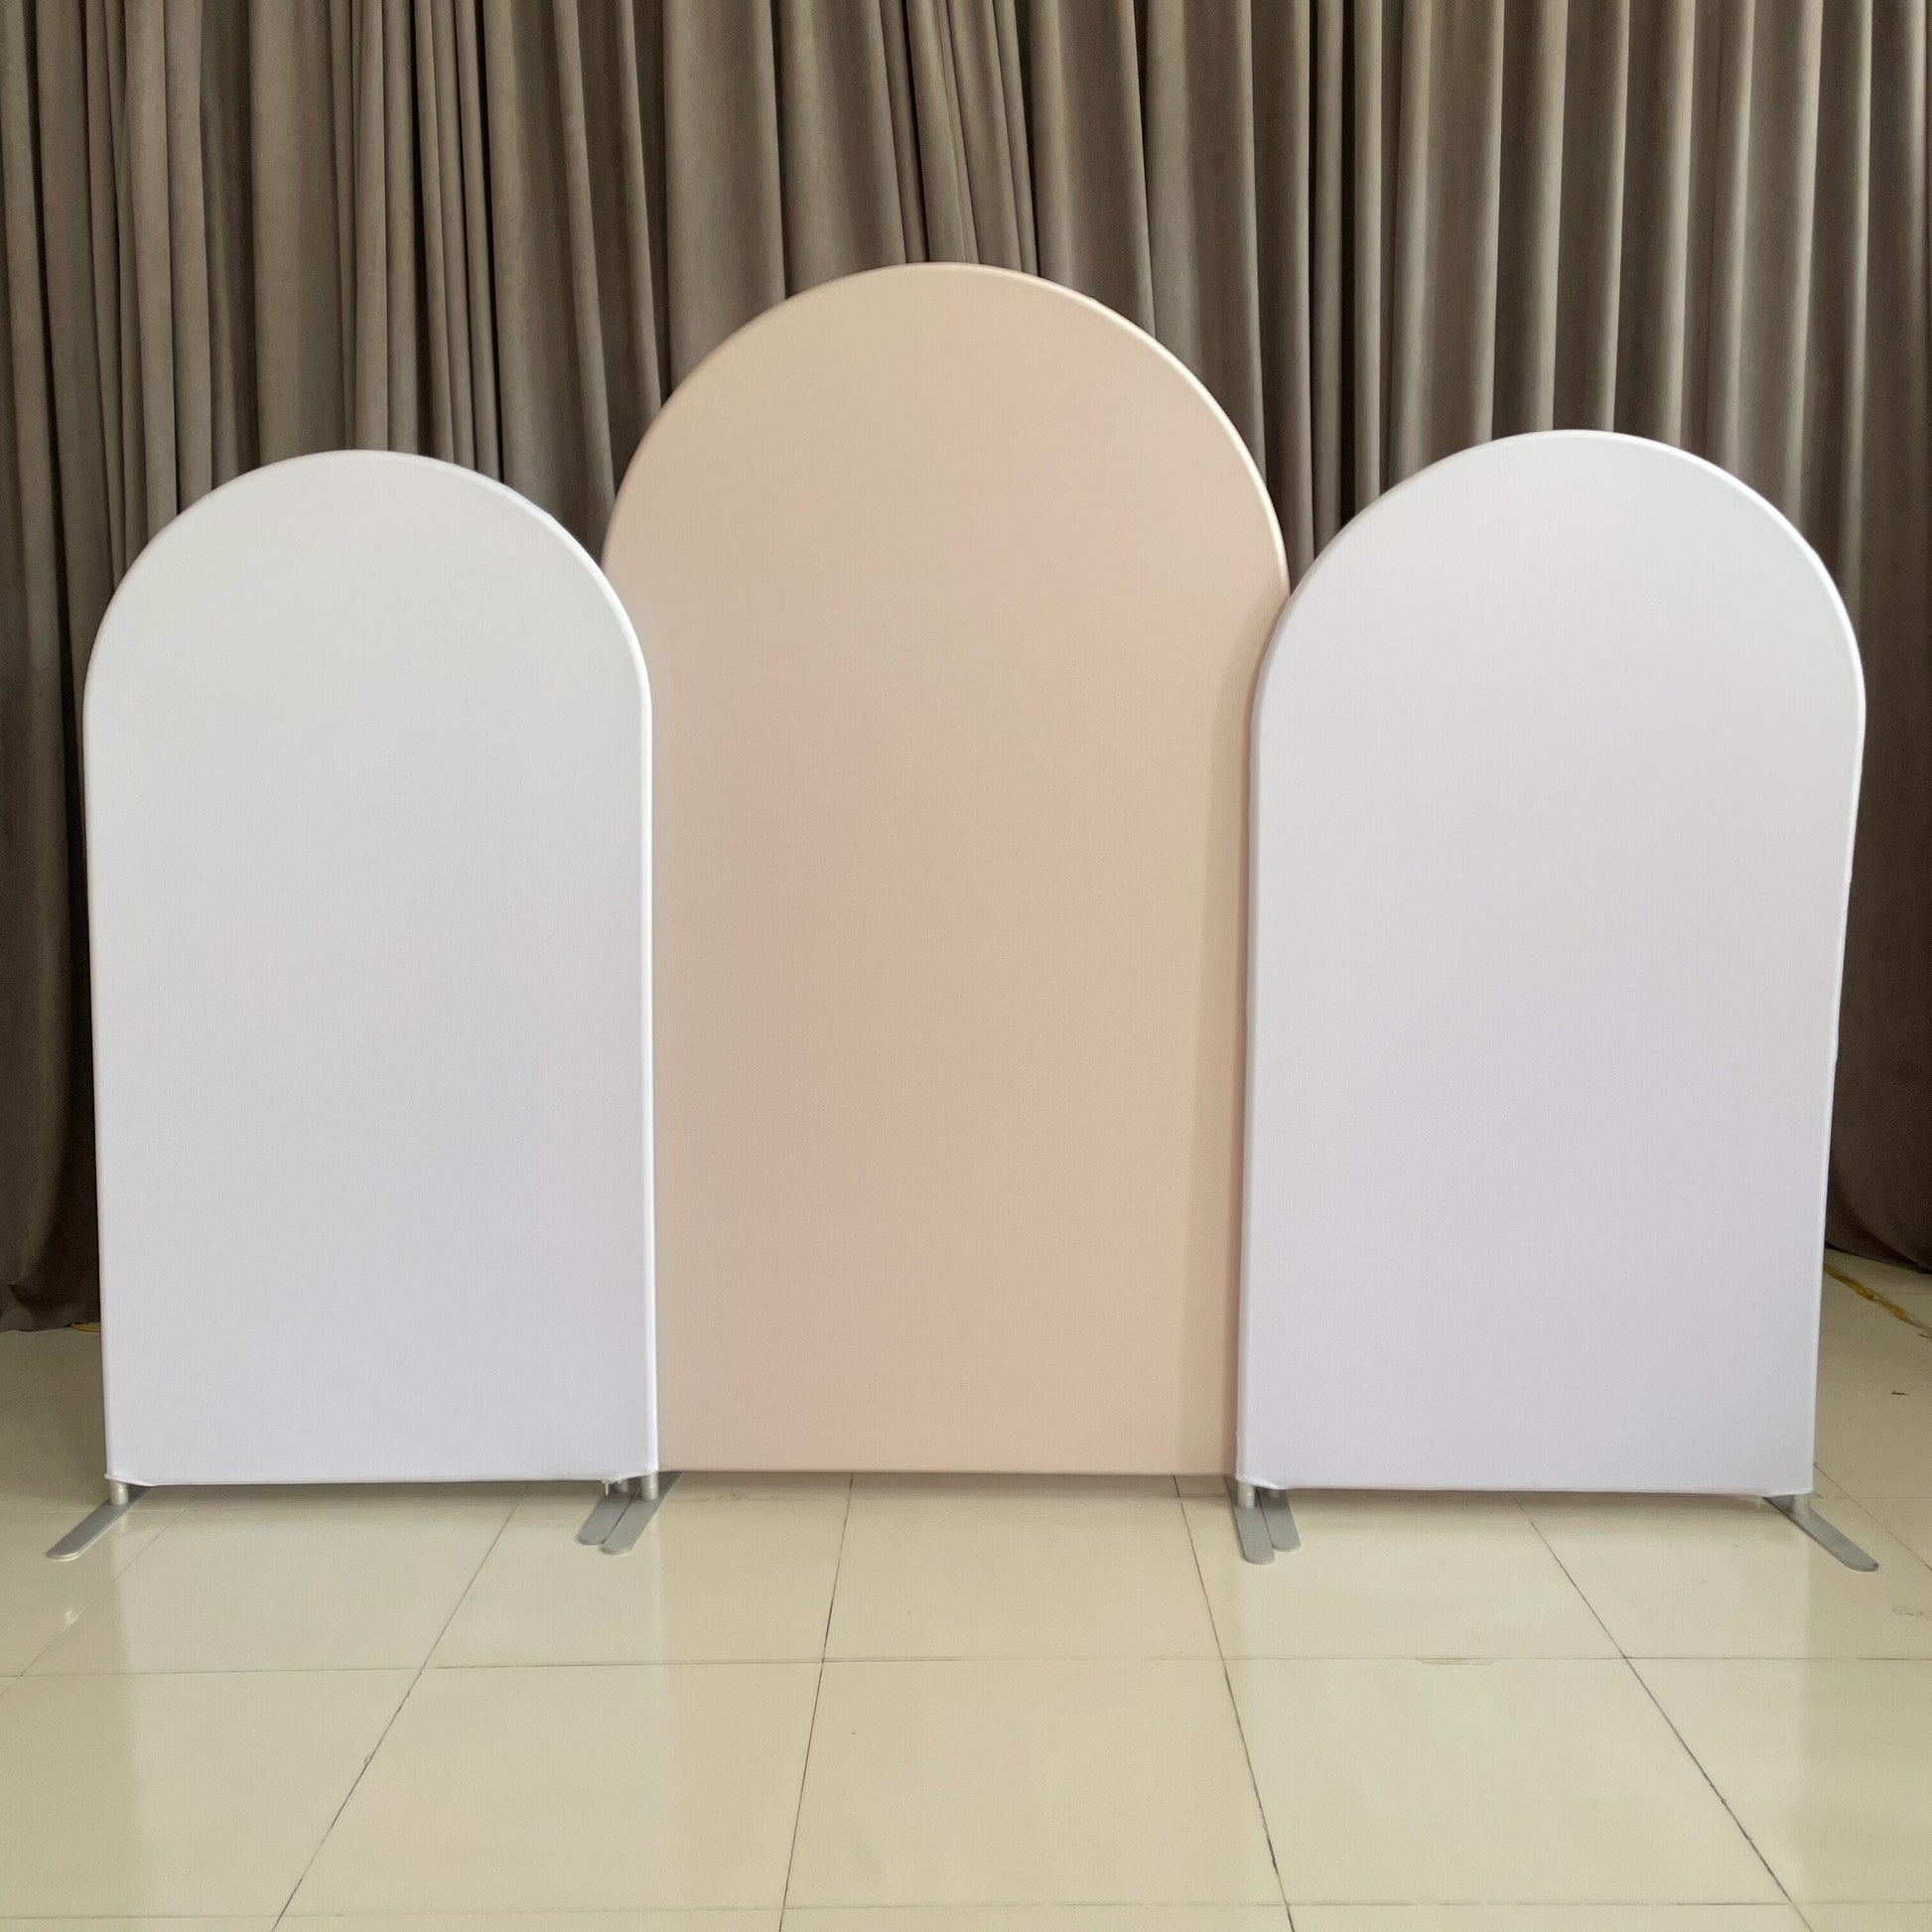 WeddingStory Shop 3 stands only / Type 1 Background Arch with the cover